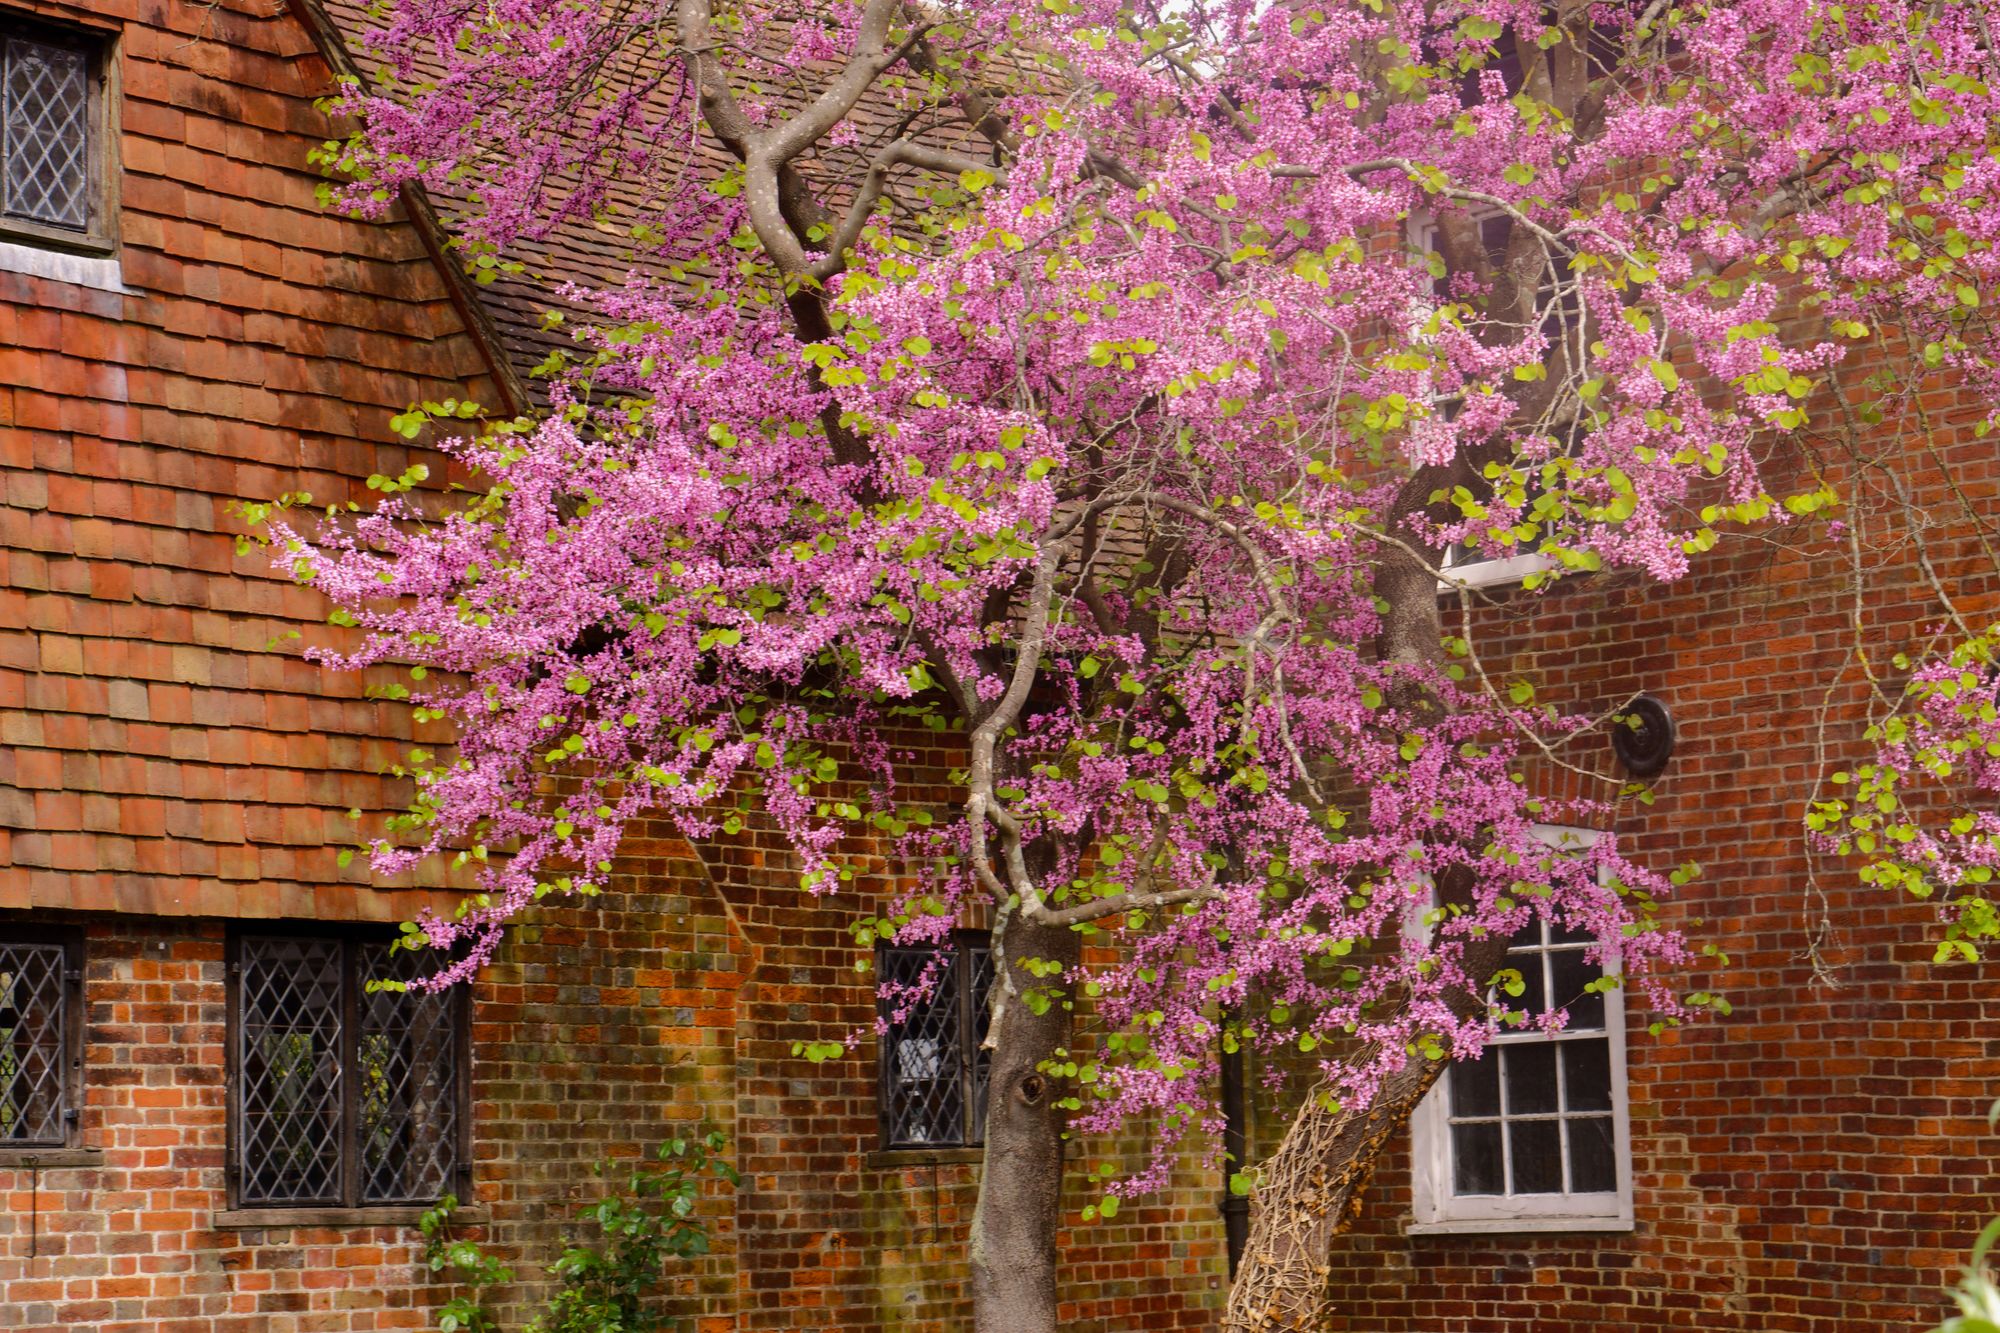 A gnarled tree with pink blossom against a red brick building.